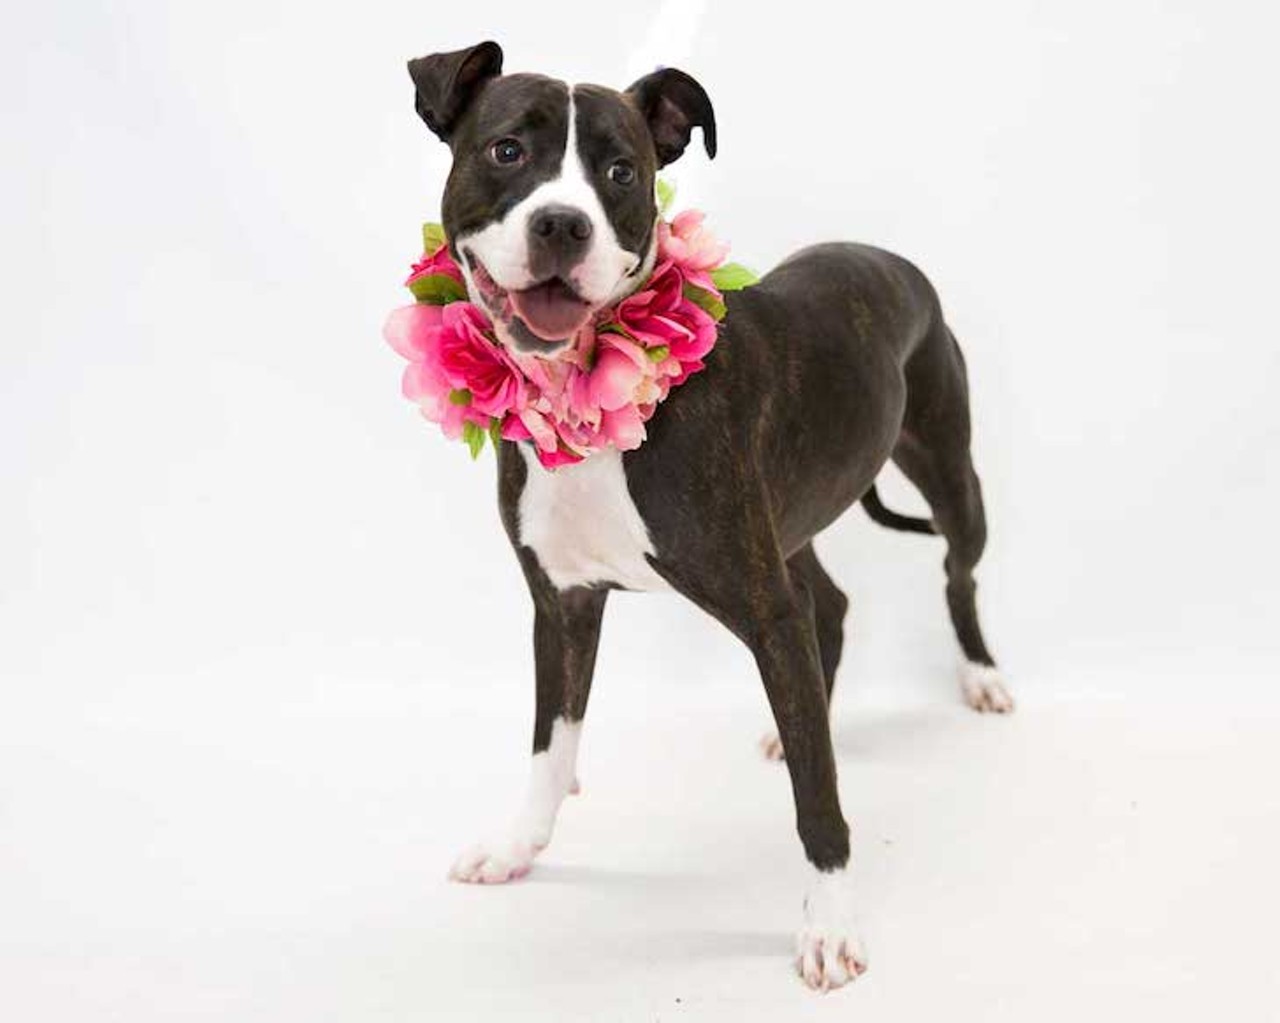 21 adoptable dogs available right now at Orange County Animal Services